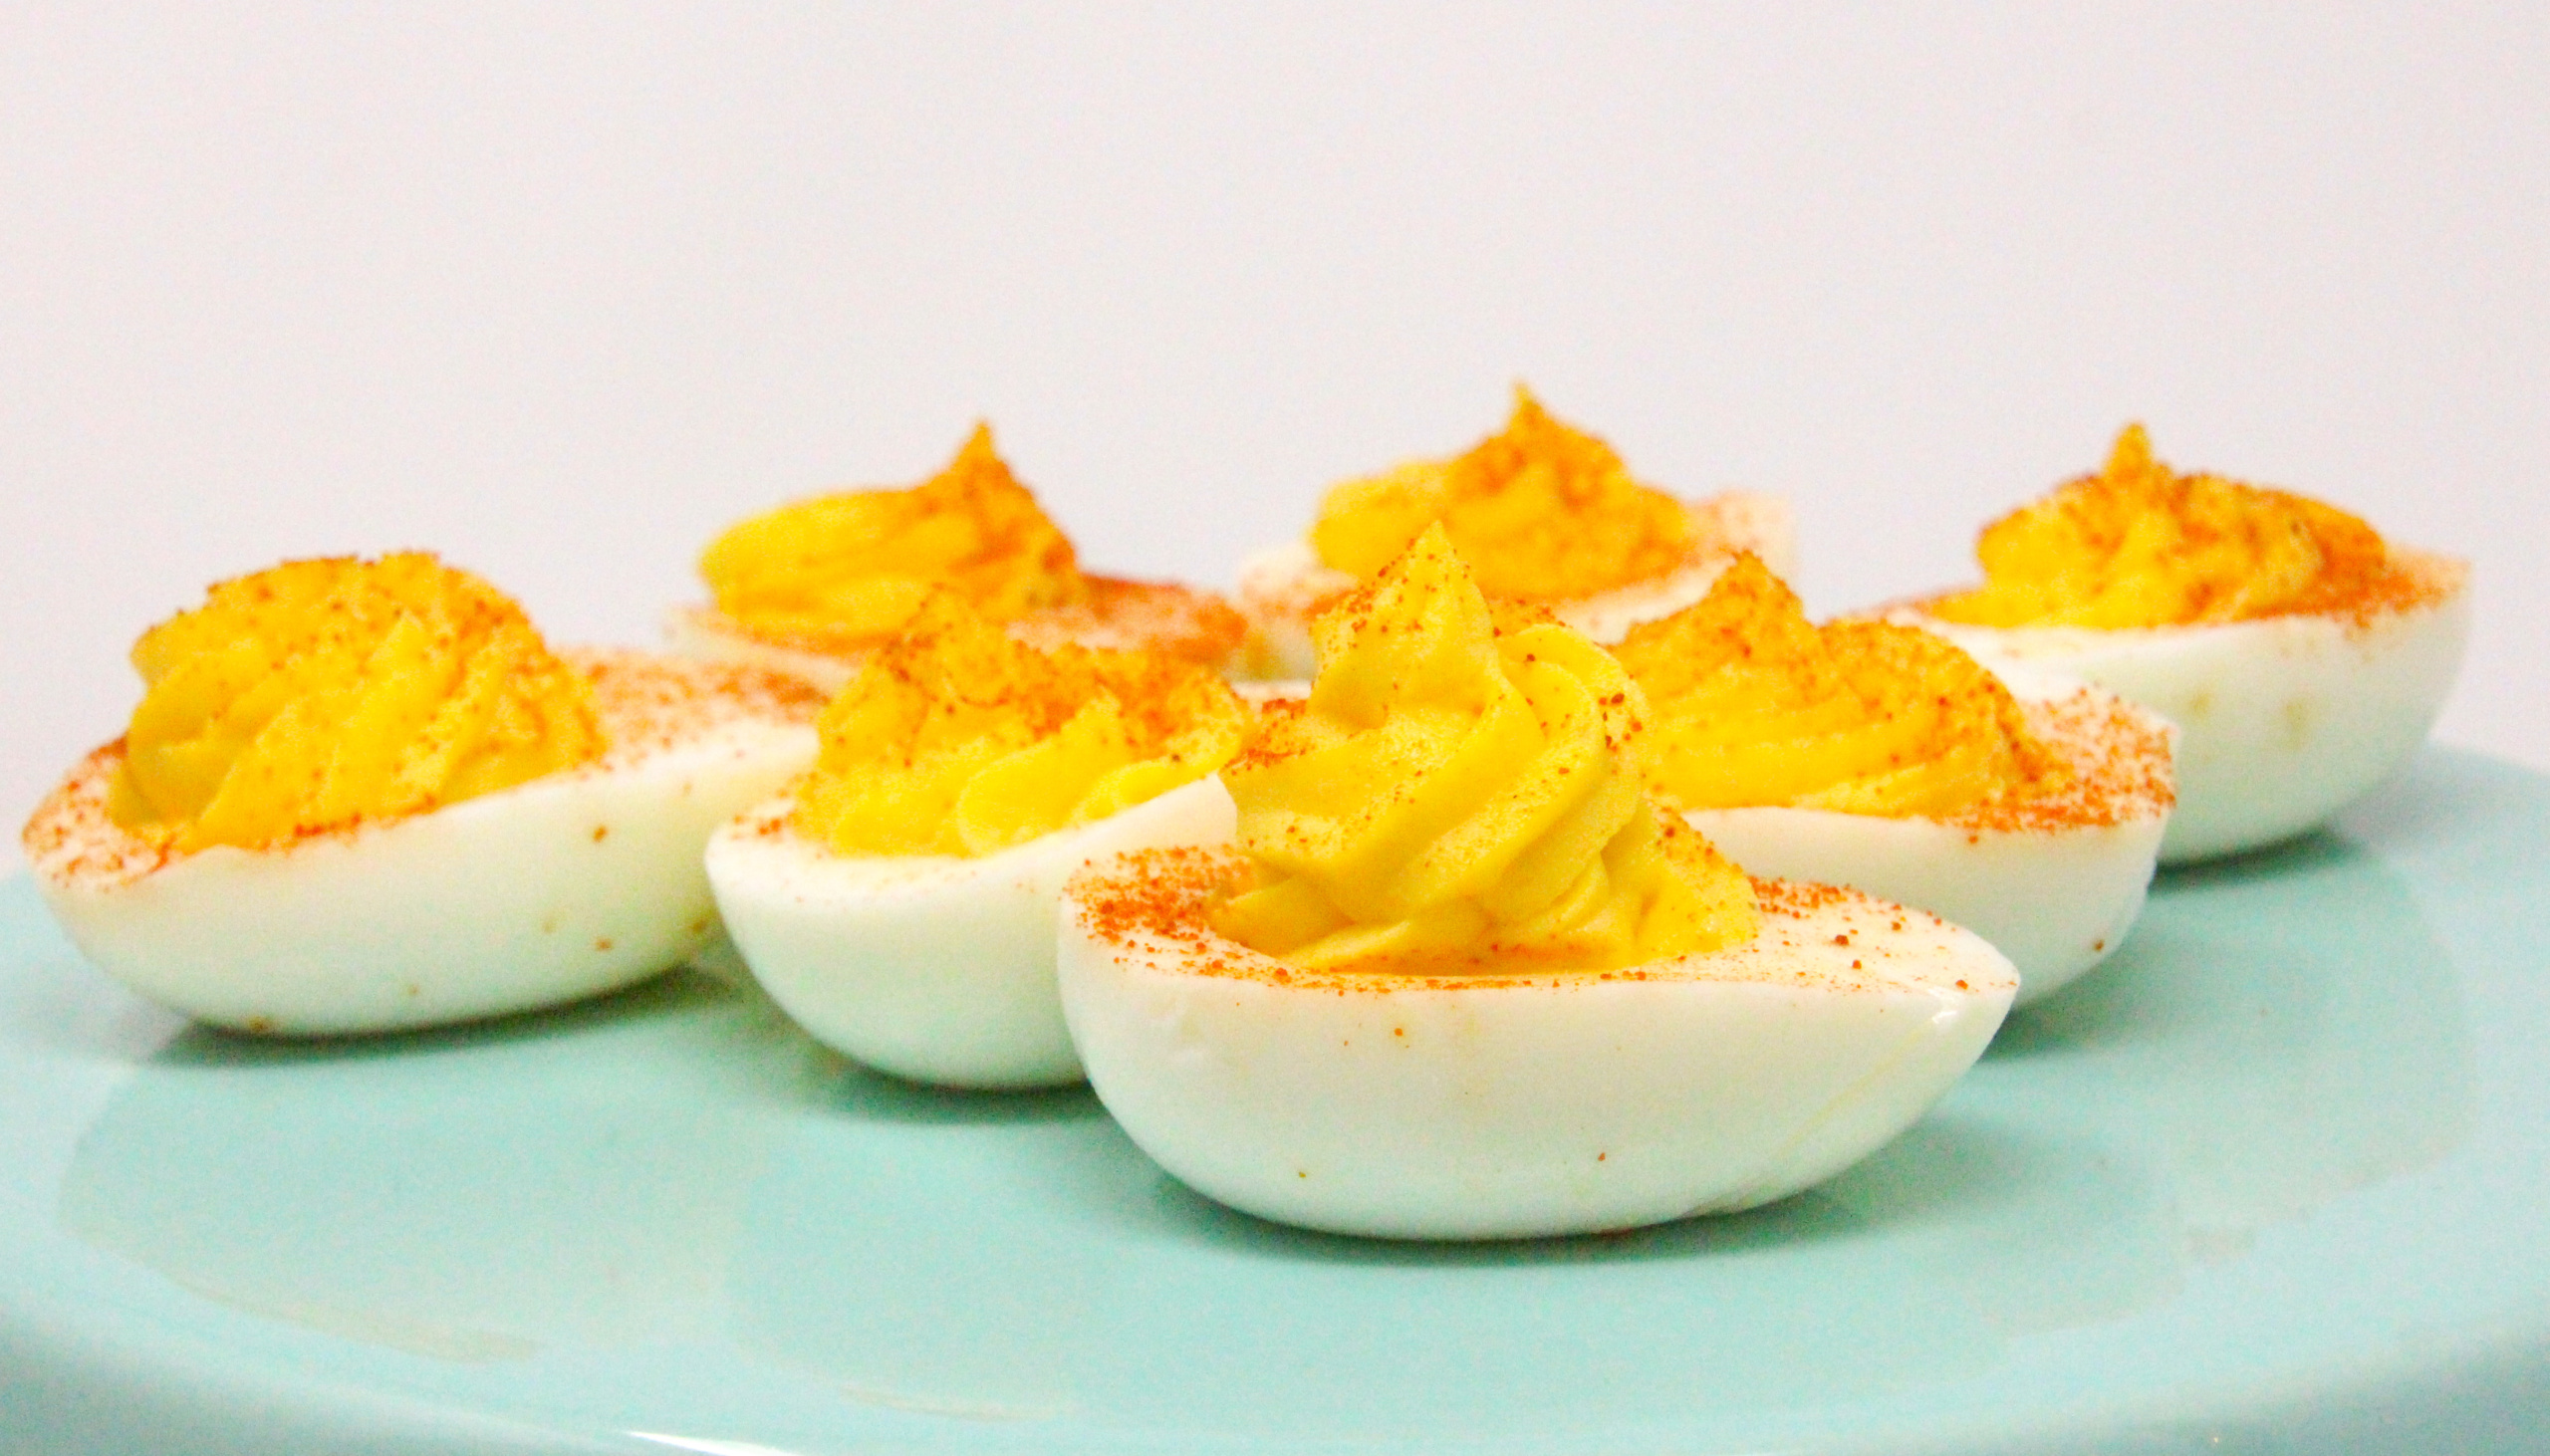 This recipe makes it easy to perfectly cook and season deviled eggs without any guessing. Everyone will love these rich and creamy appetizers! Recipe shared with permission granted by Krista Davis, author of THE DOG ACROSS THE LAKE. 